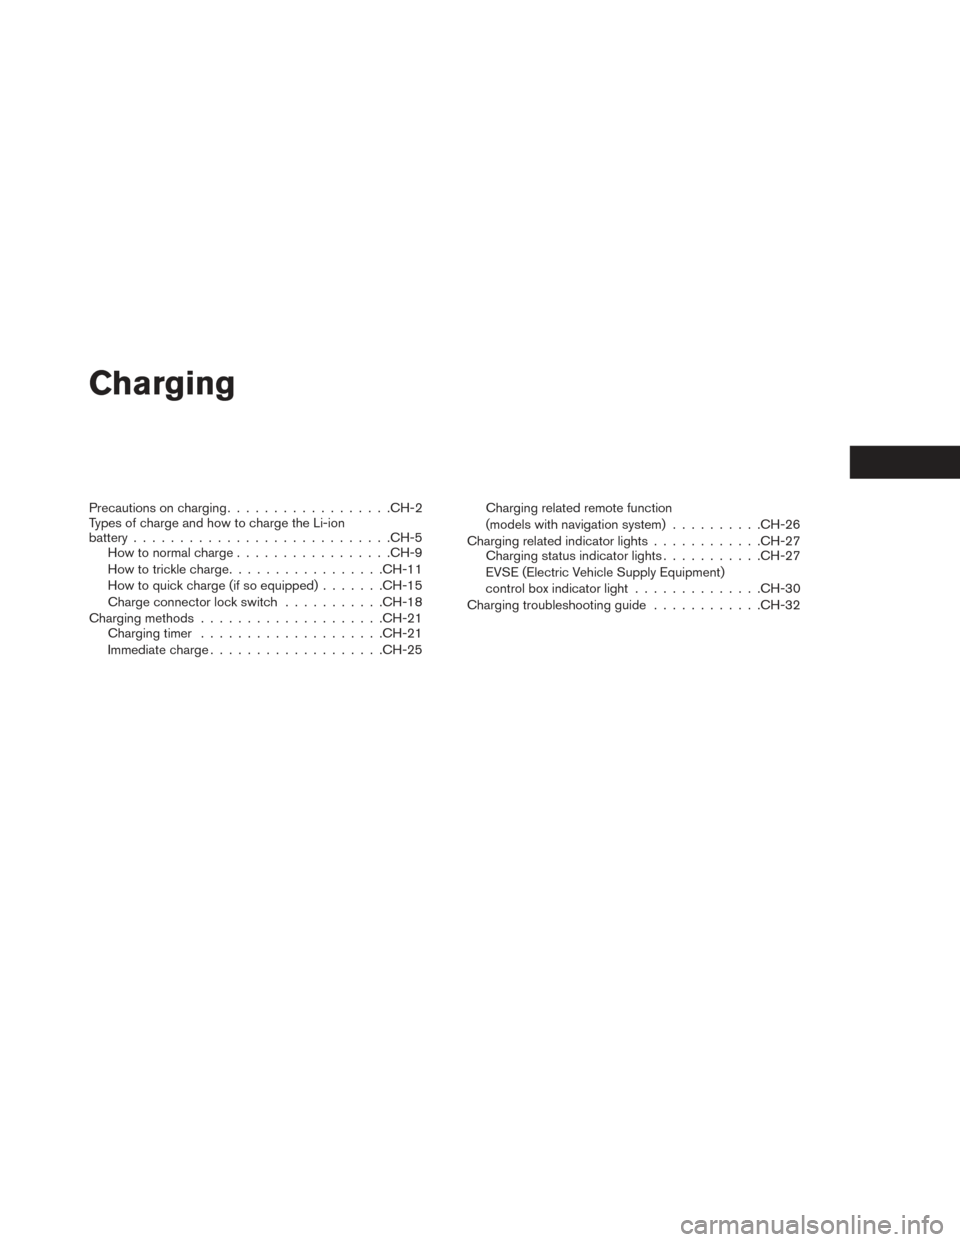 NISSAN LEAF 2016 1.G Service Manual Charging
Precautions on charging................. .CH-2
Types of charge and how to charge the Li-ion
battery ........................... .CH-5
How to normal charge ................ .CH-9
How to trickl